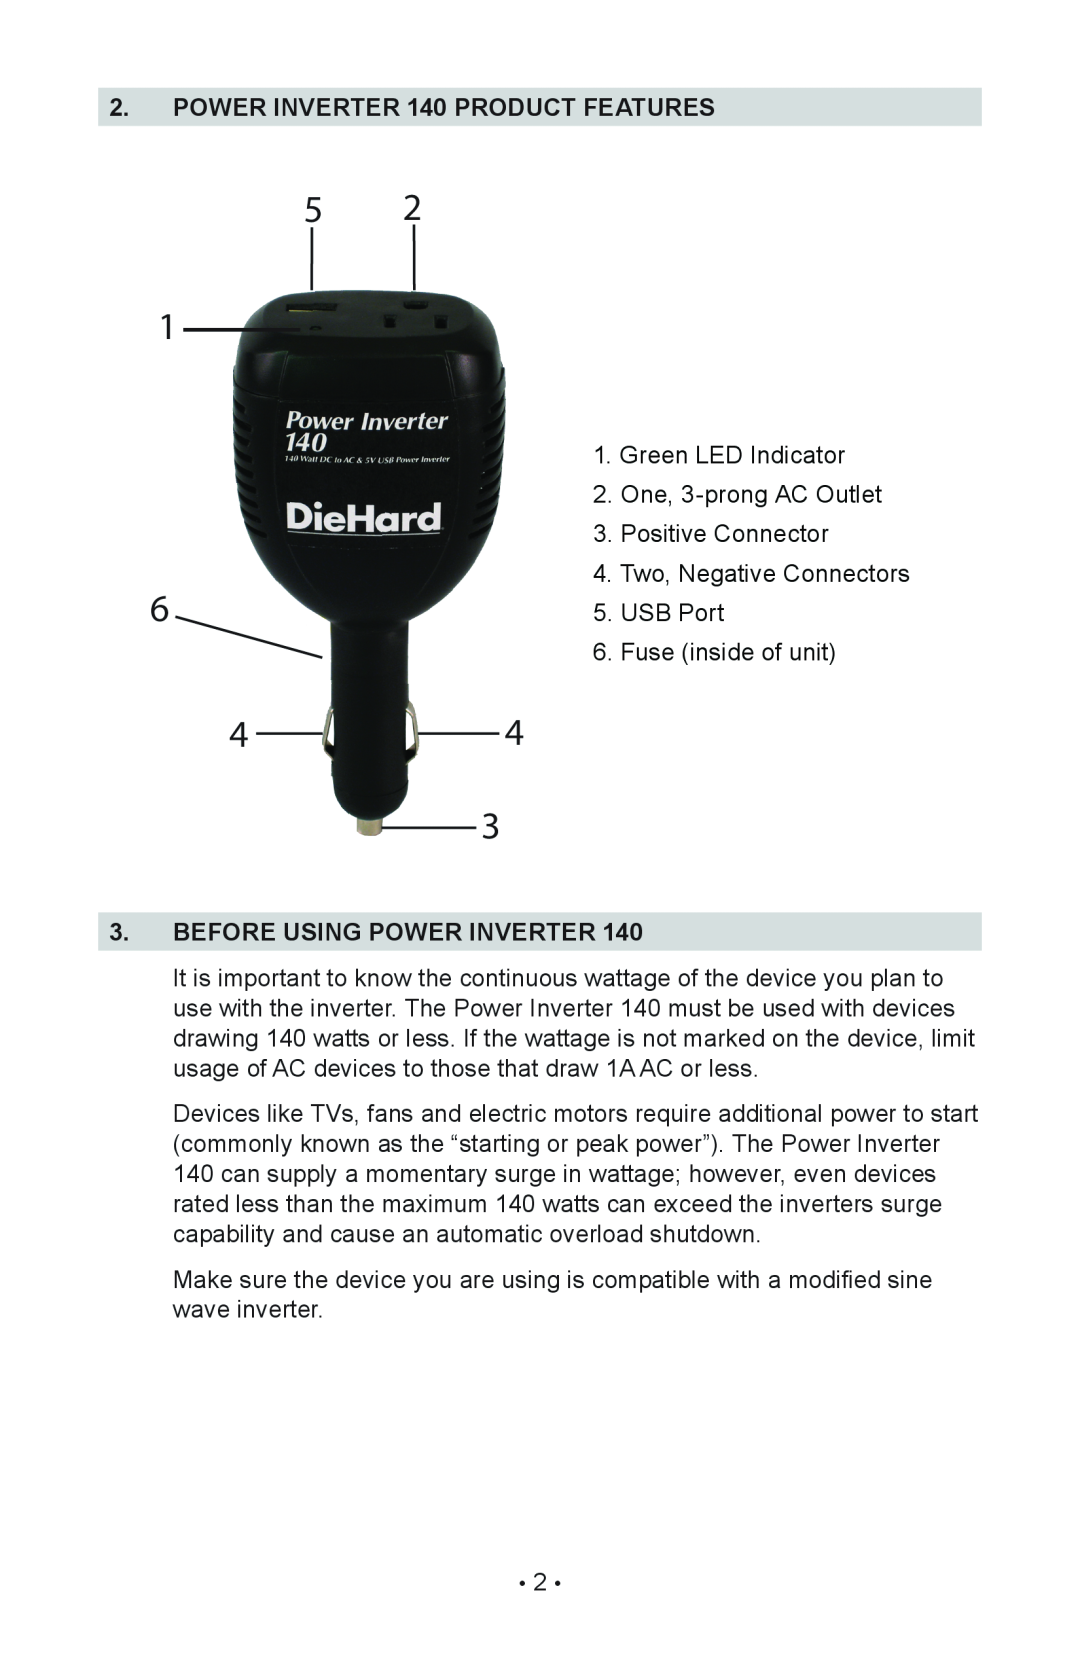 Sears 200.71522 operating instructions power inverter 140 product features, before using power inverter 